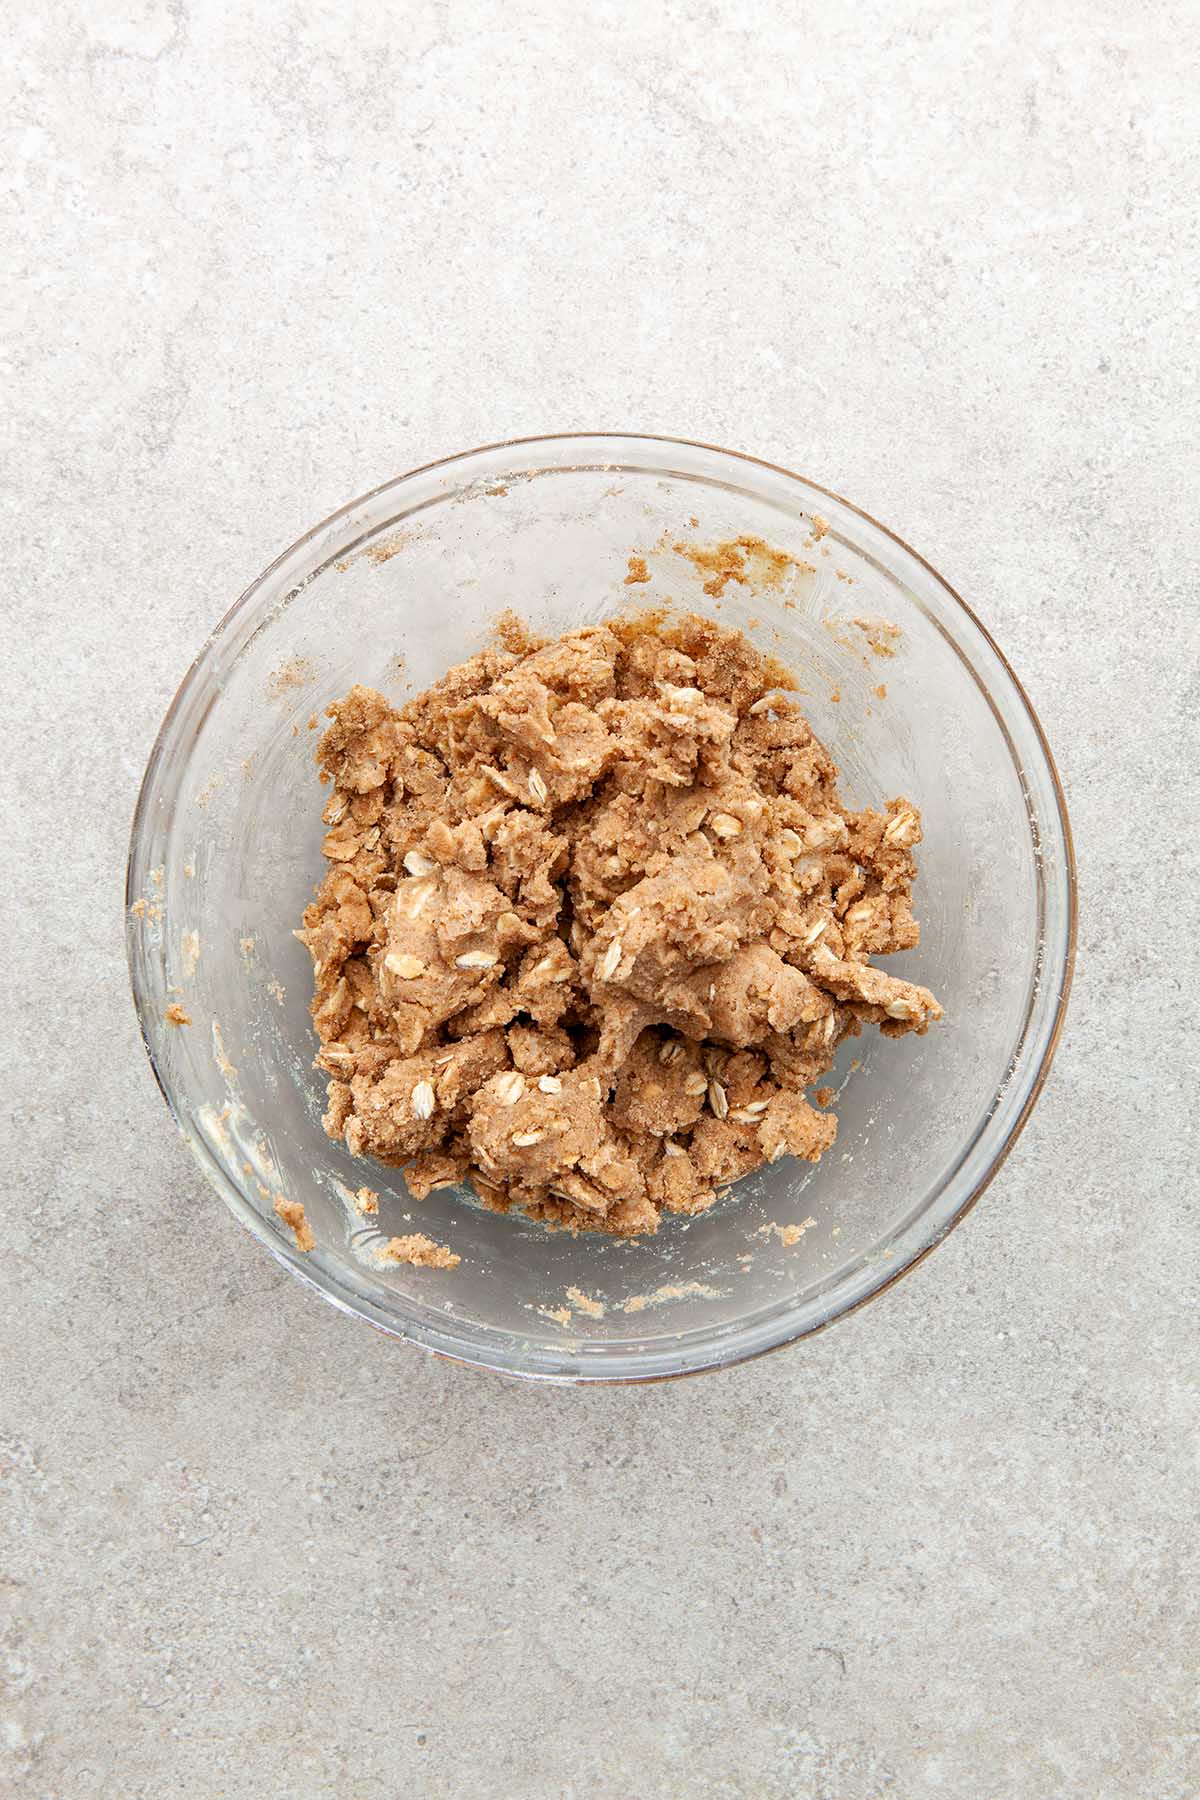 A bowl of butter mixed with flour, brown sugar, and oats.